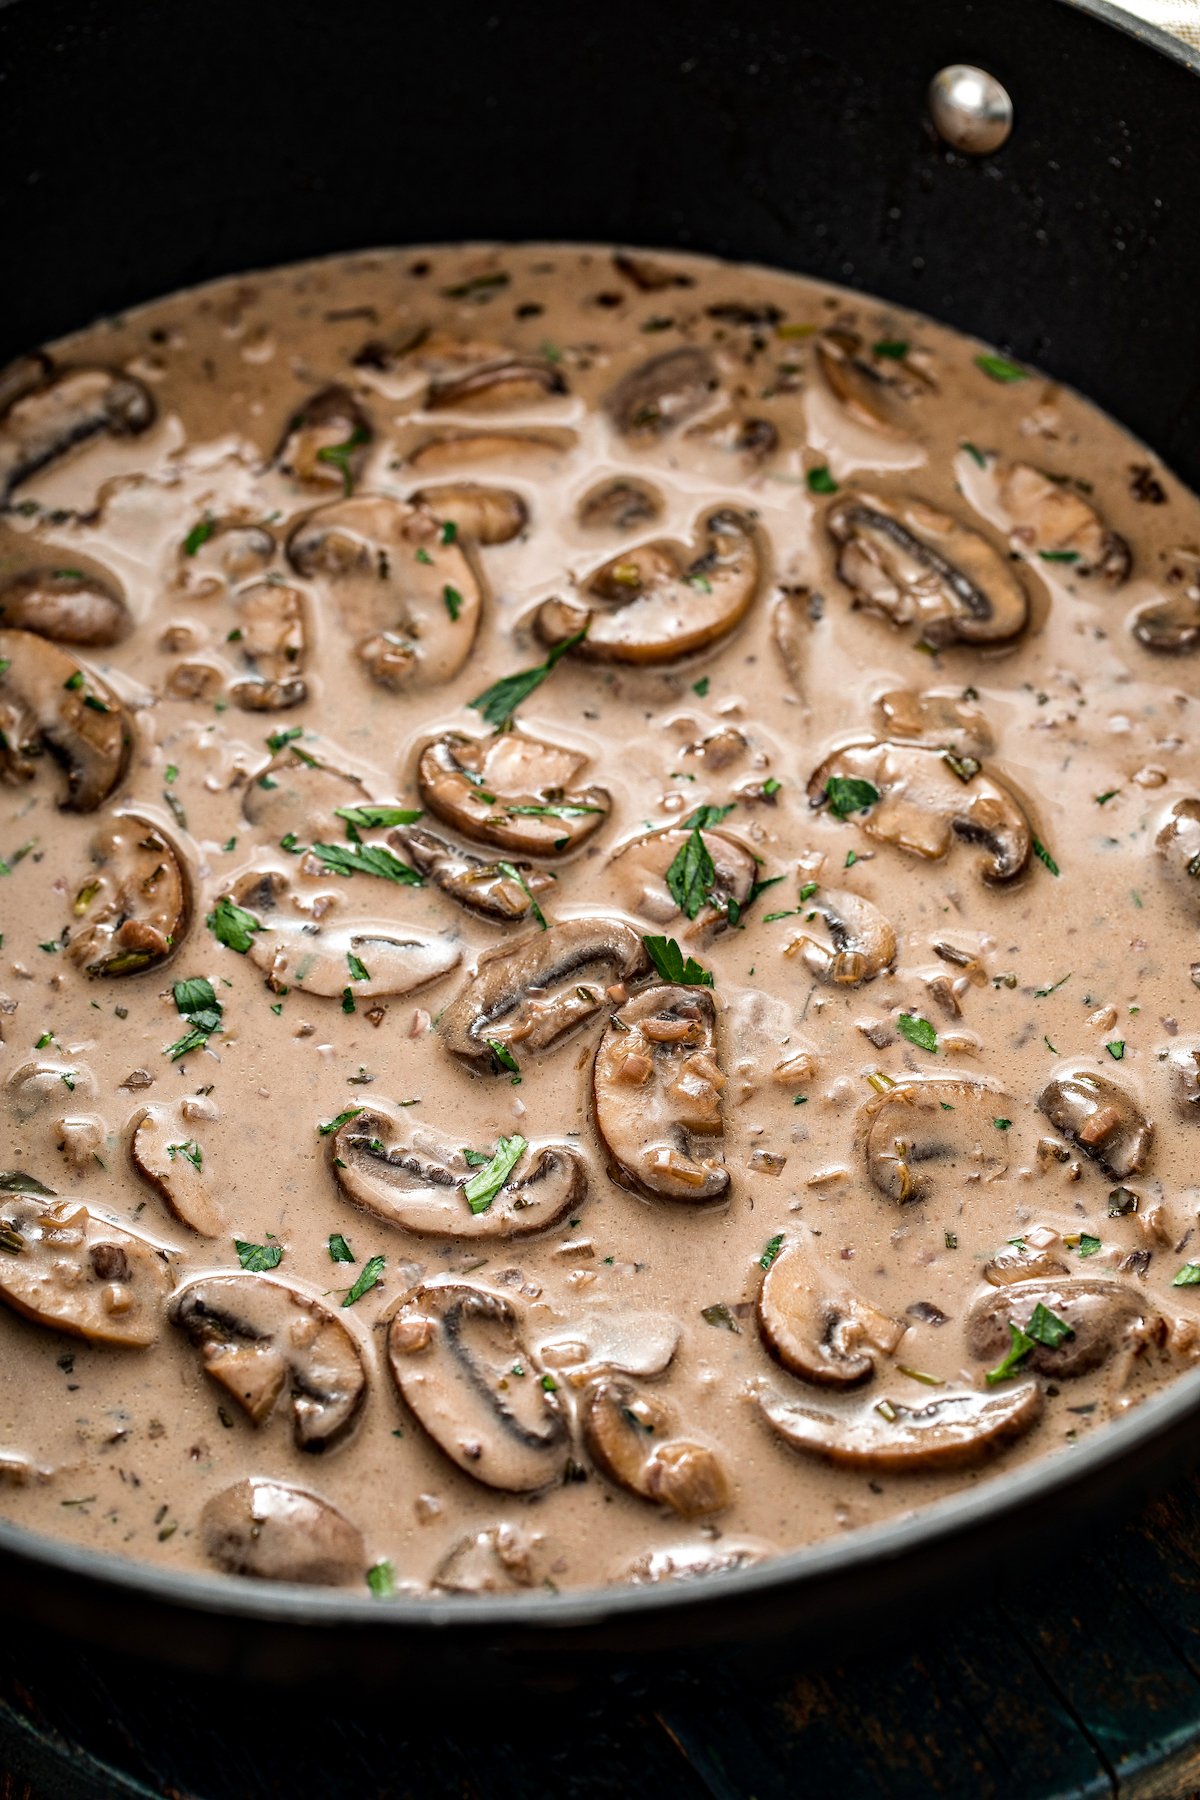 Mushroom sauce with parsley sprinkled over it.